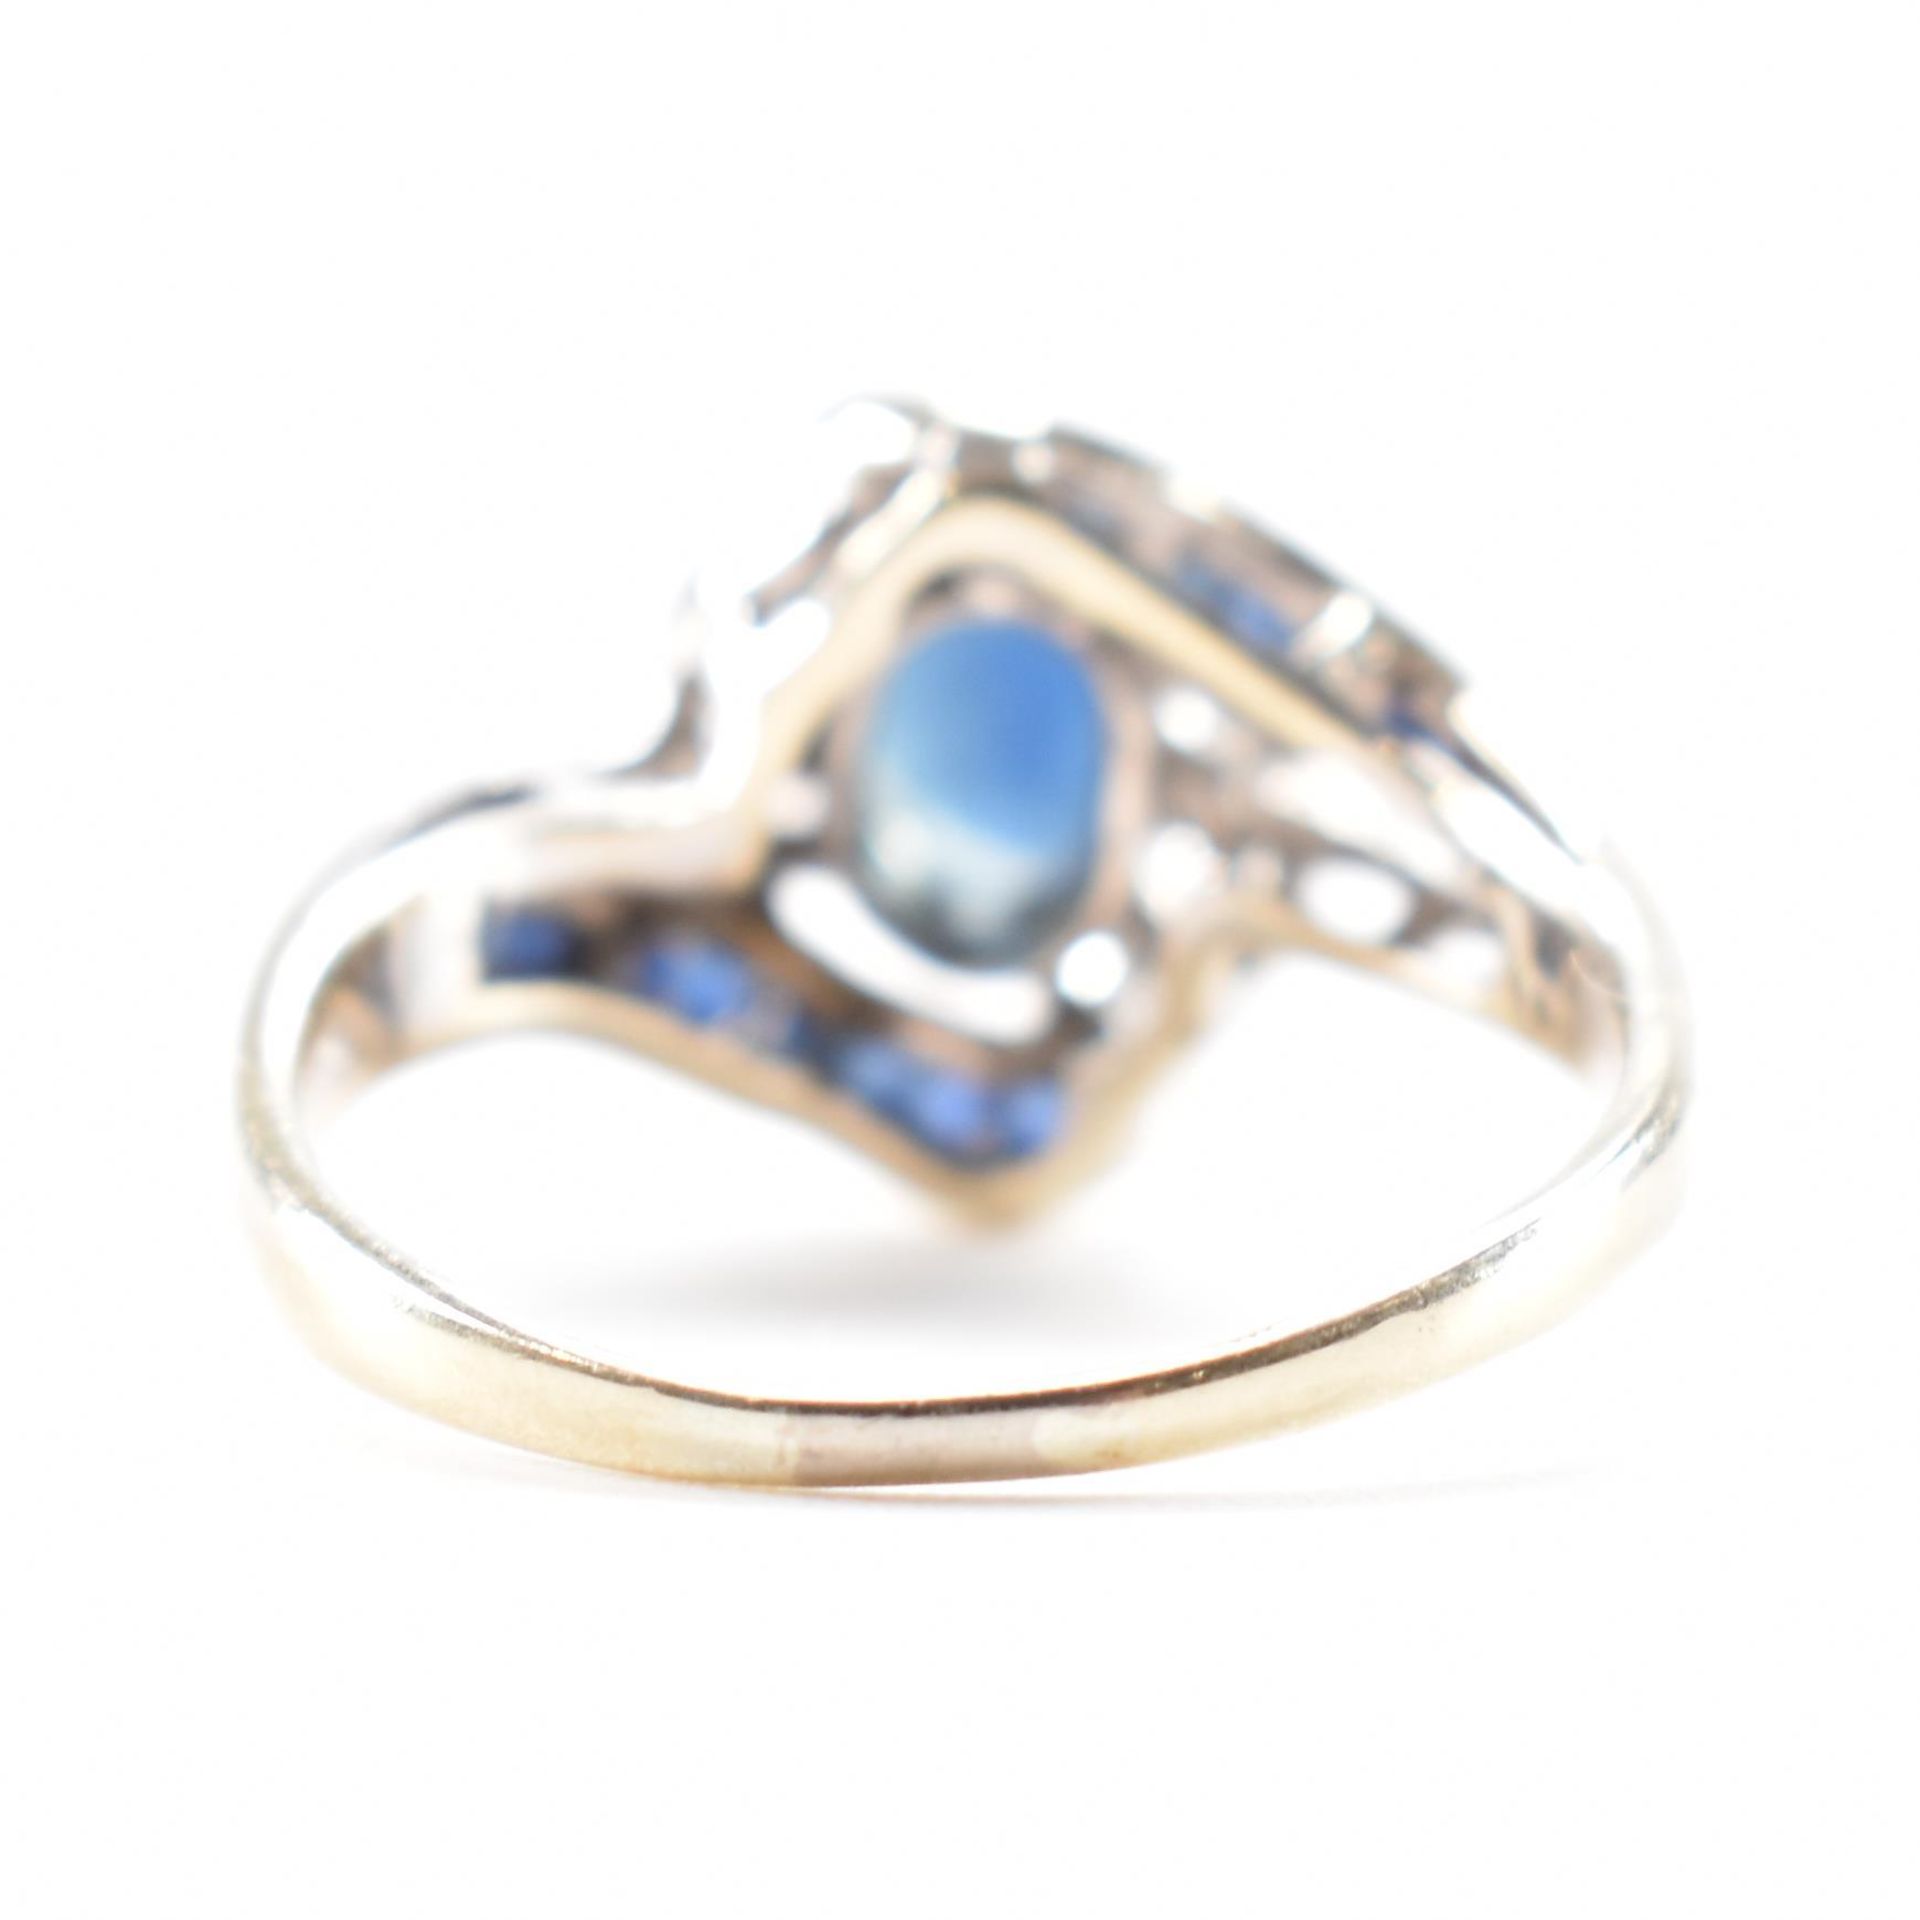 WHITE GOLD SAPPHIRE & DIAMOND CROSSOVER RING - Image 4 of 11